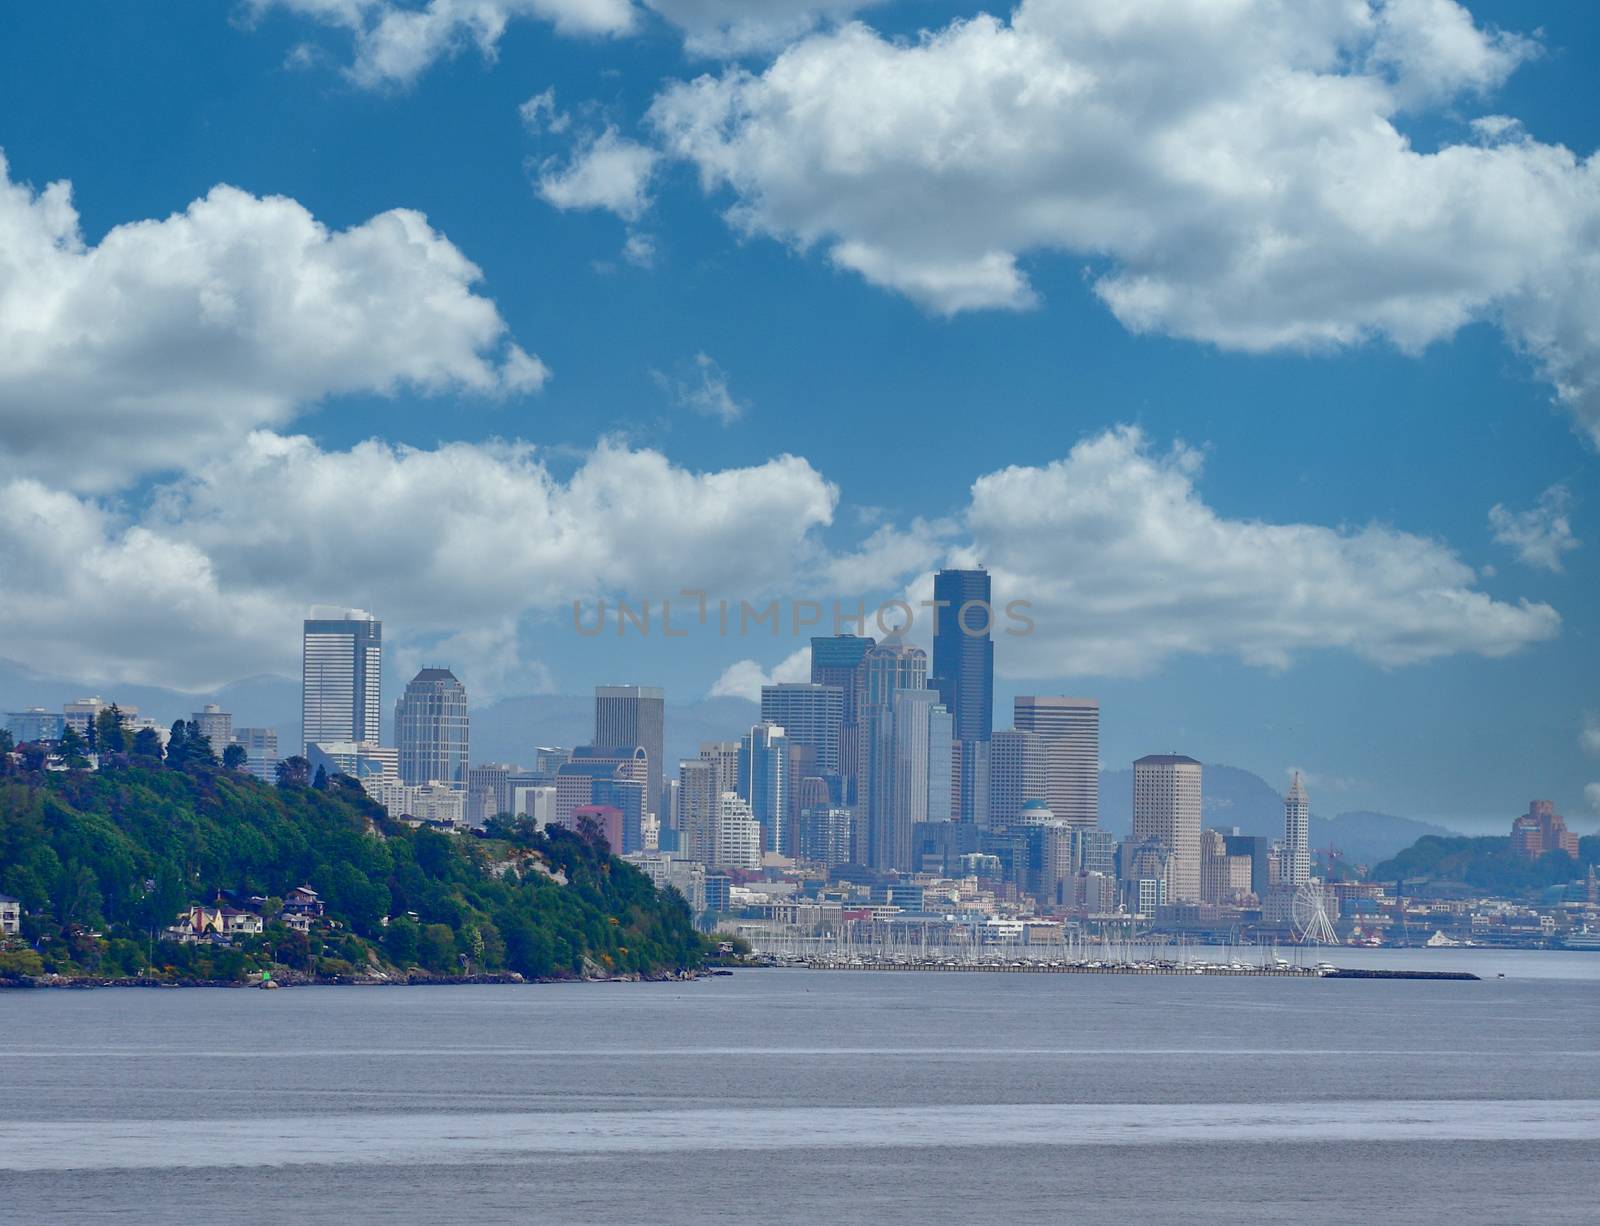 A view of Seattle from beyond a point of land with Space Needle in distance